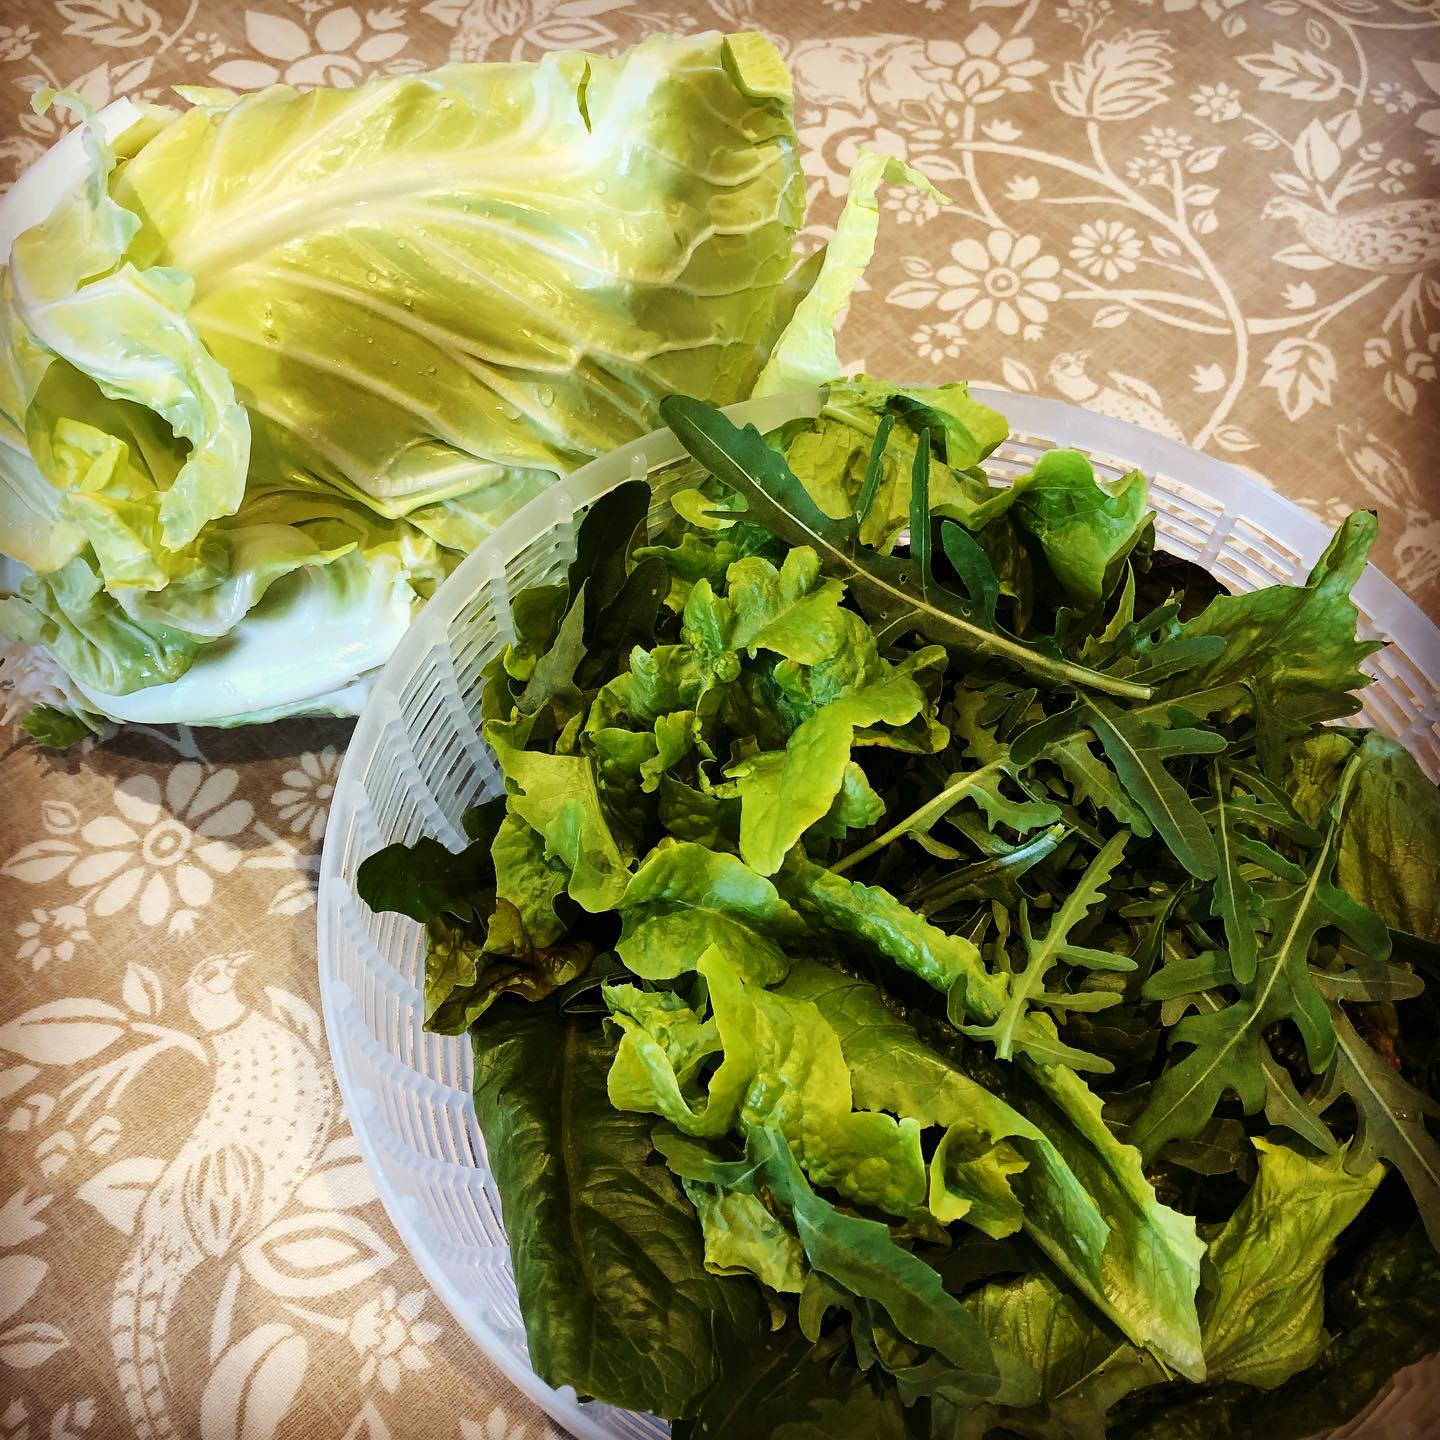 Polytunnel to plate. Delicious green salad and greyhound cabbage with dinner. #growyourown #eatyourgreens #homegrown #kitchengarden